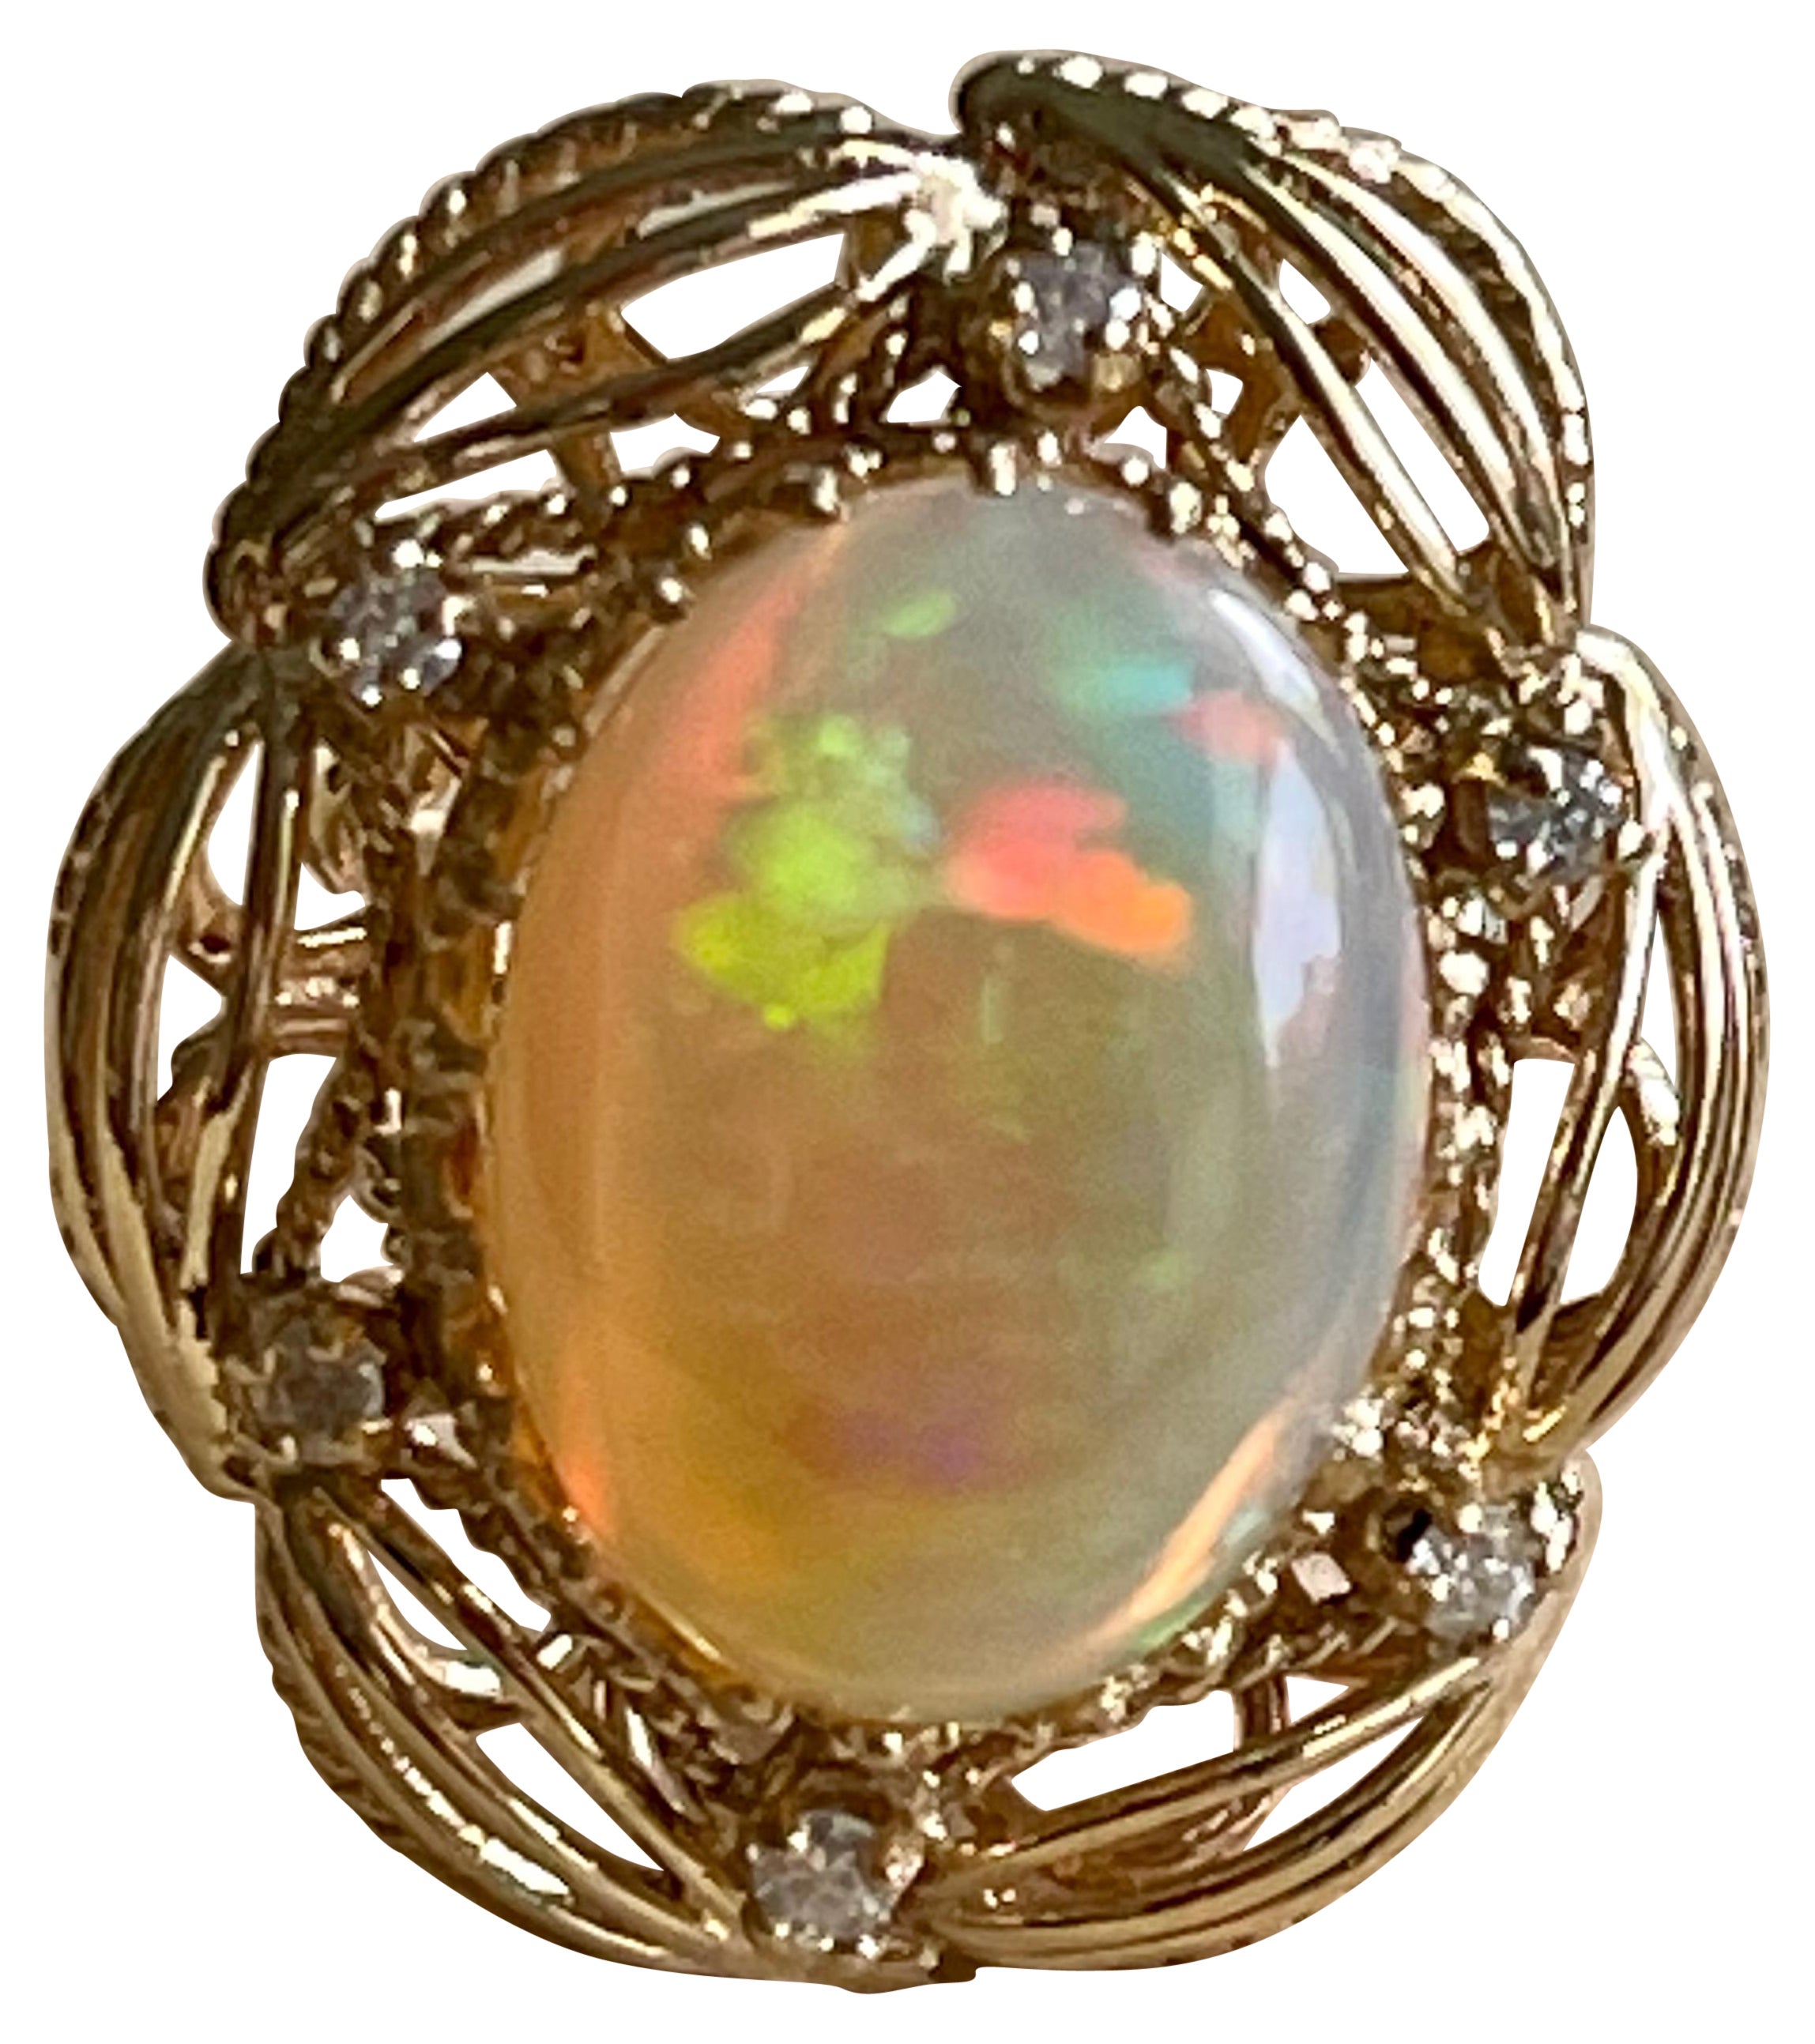 15 Carat Oval Shape Ethiopian Opal Cocktail Ring 14 Karat Yellow Gold Solid Ring